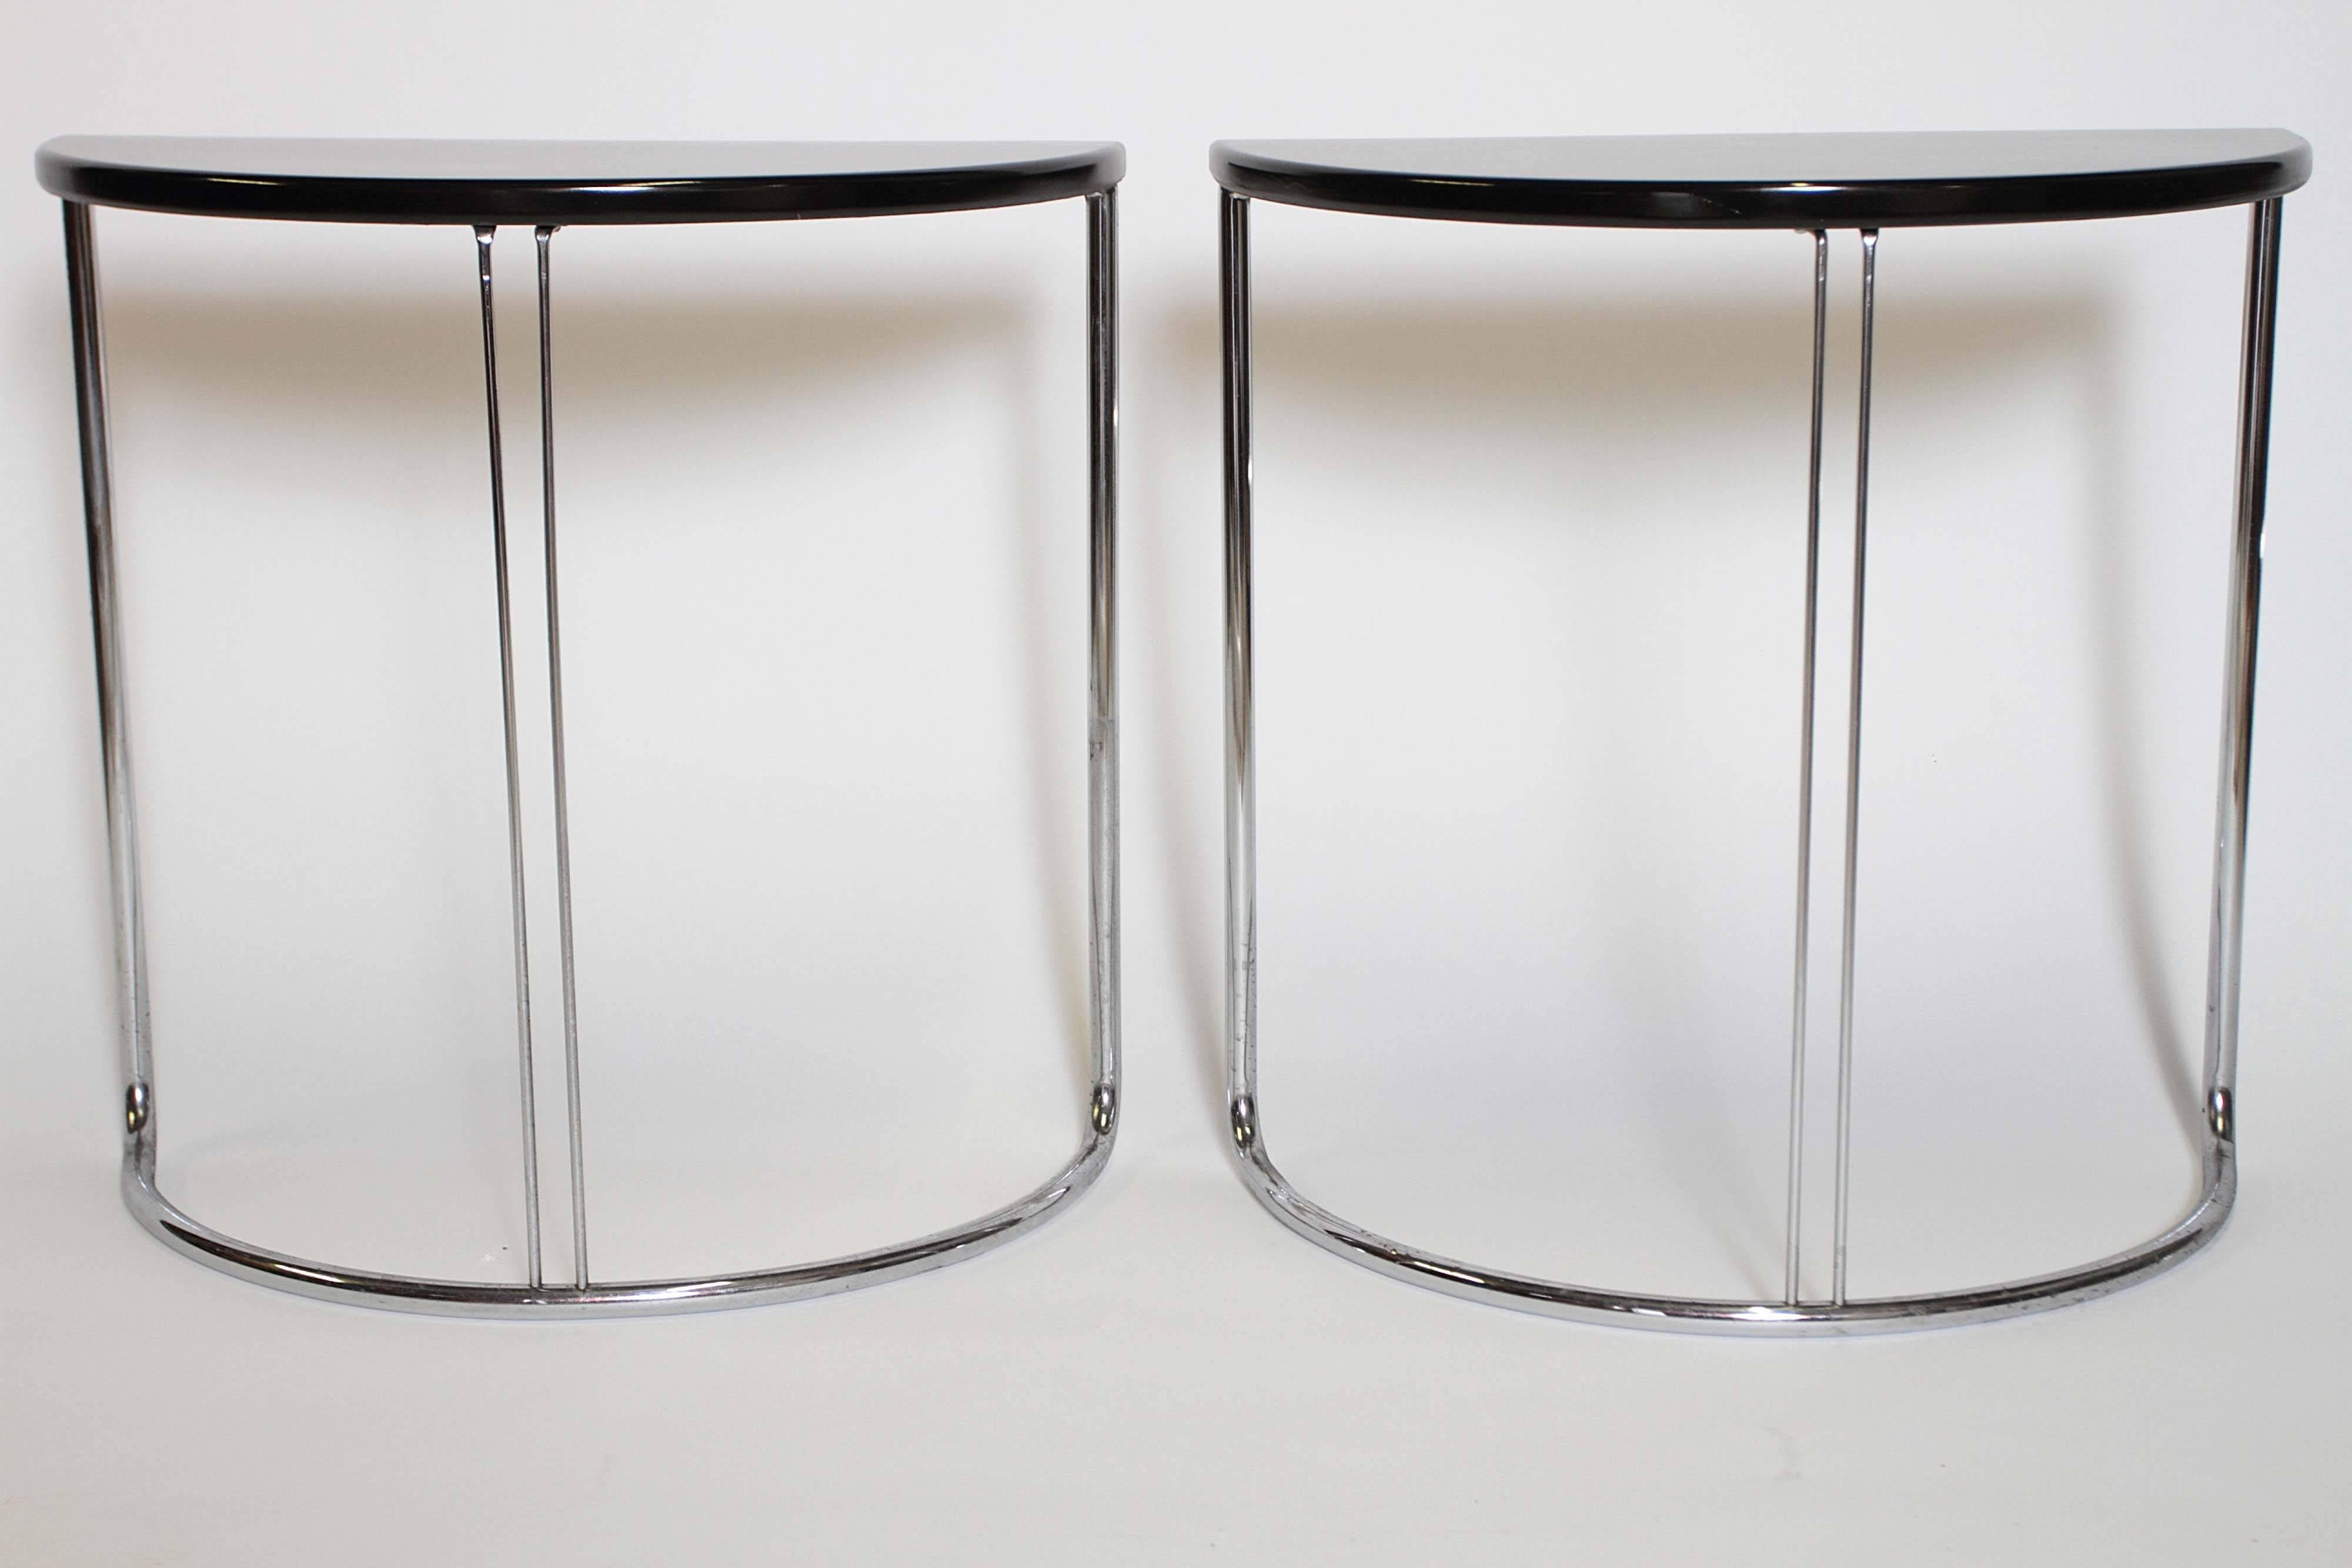 One of two Rohde original thin-rod streamline designs for Troy. 
Model #183 end table.
Very versatile, these work together as center table or apart flanking a sofa, or as twin consoles against a wall.
Troy streamline Metal decals.
Exc. lacquered